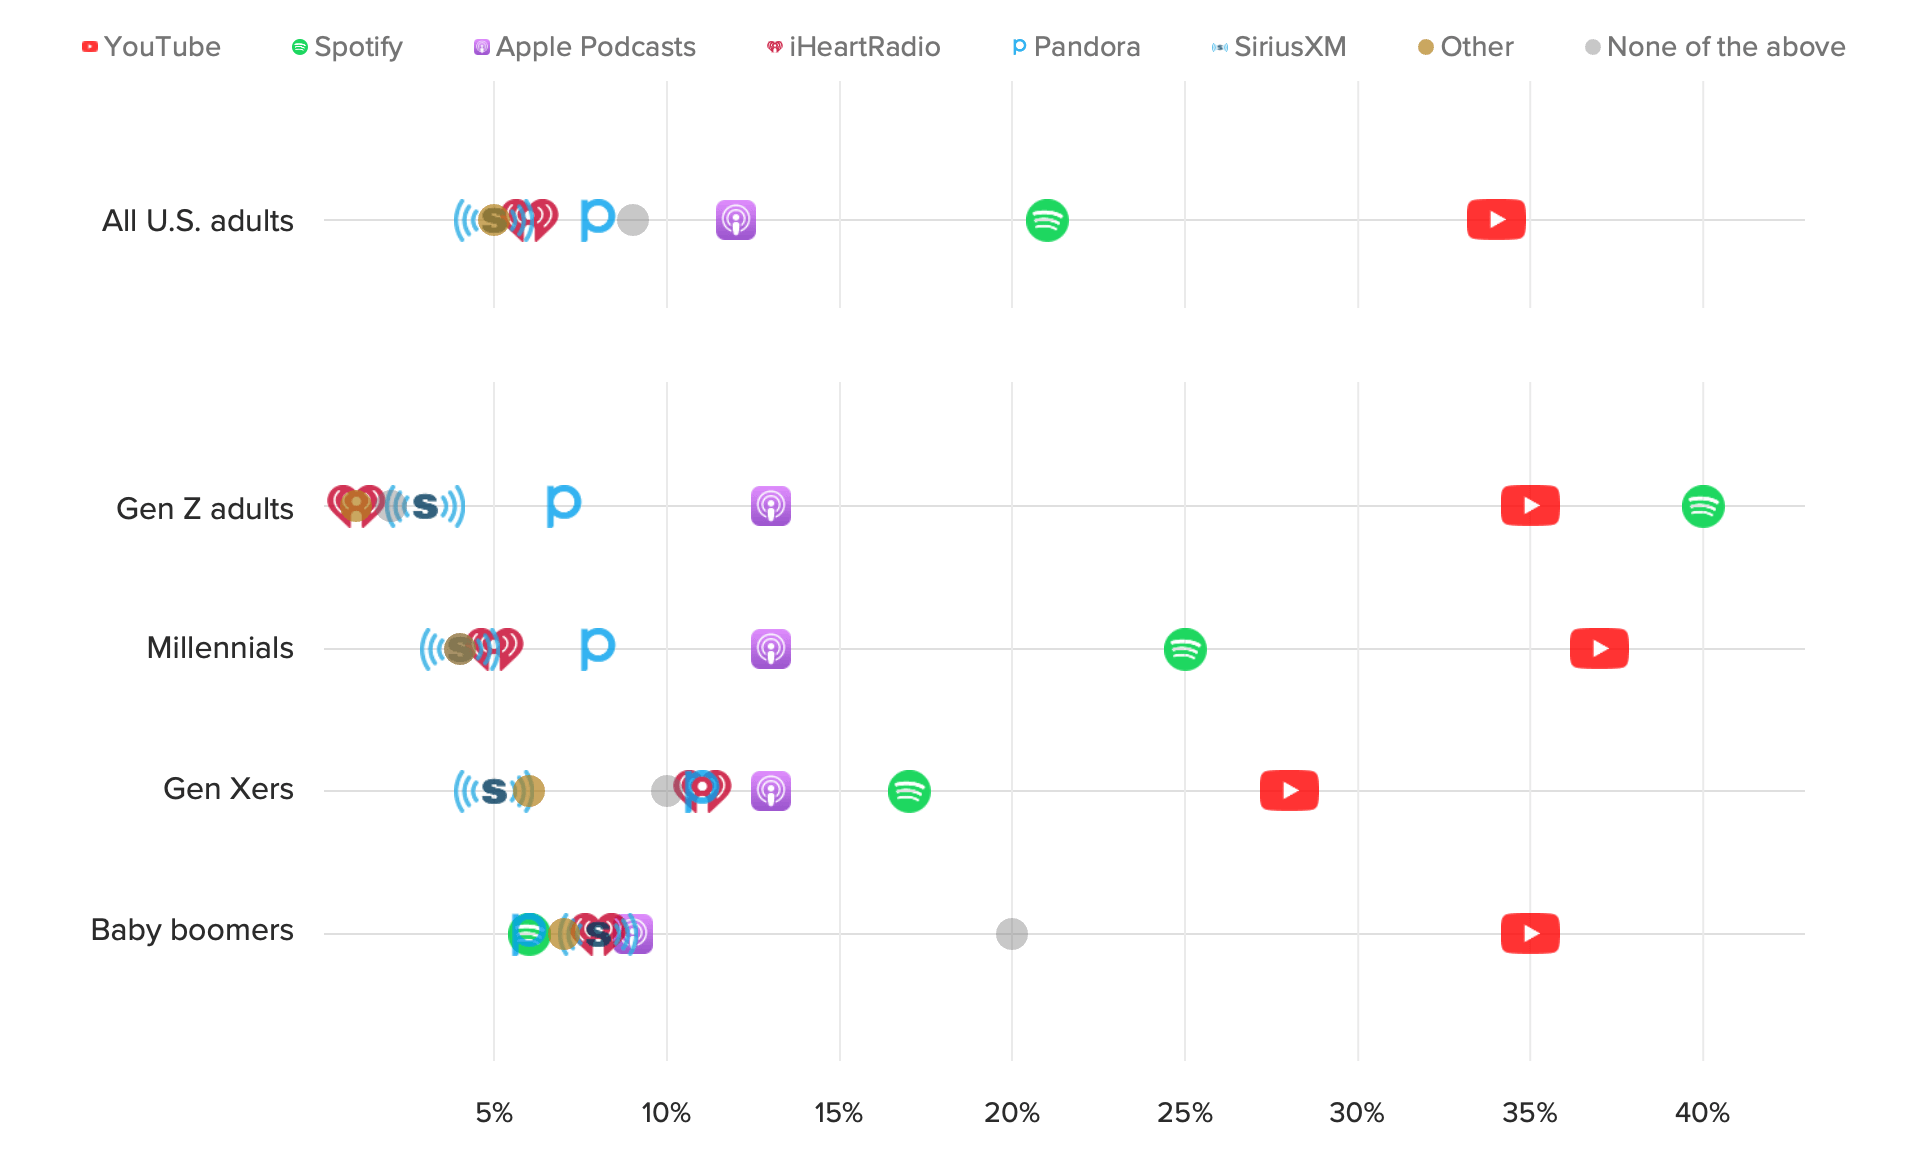 Dot plot of podcast listeners' preferred platform showing YouTube is the preferred platform of nearly every age group.